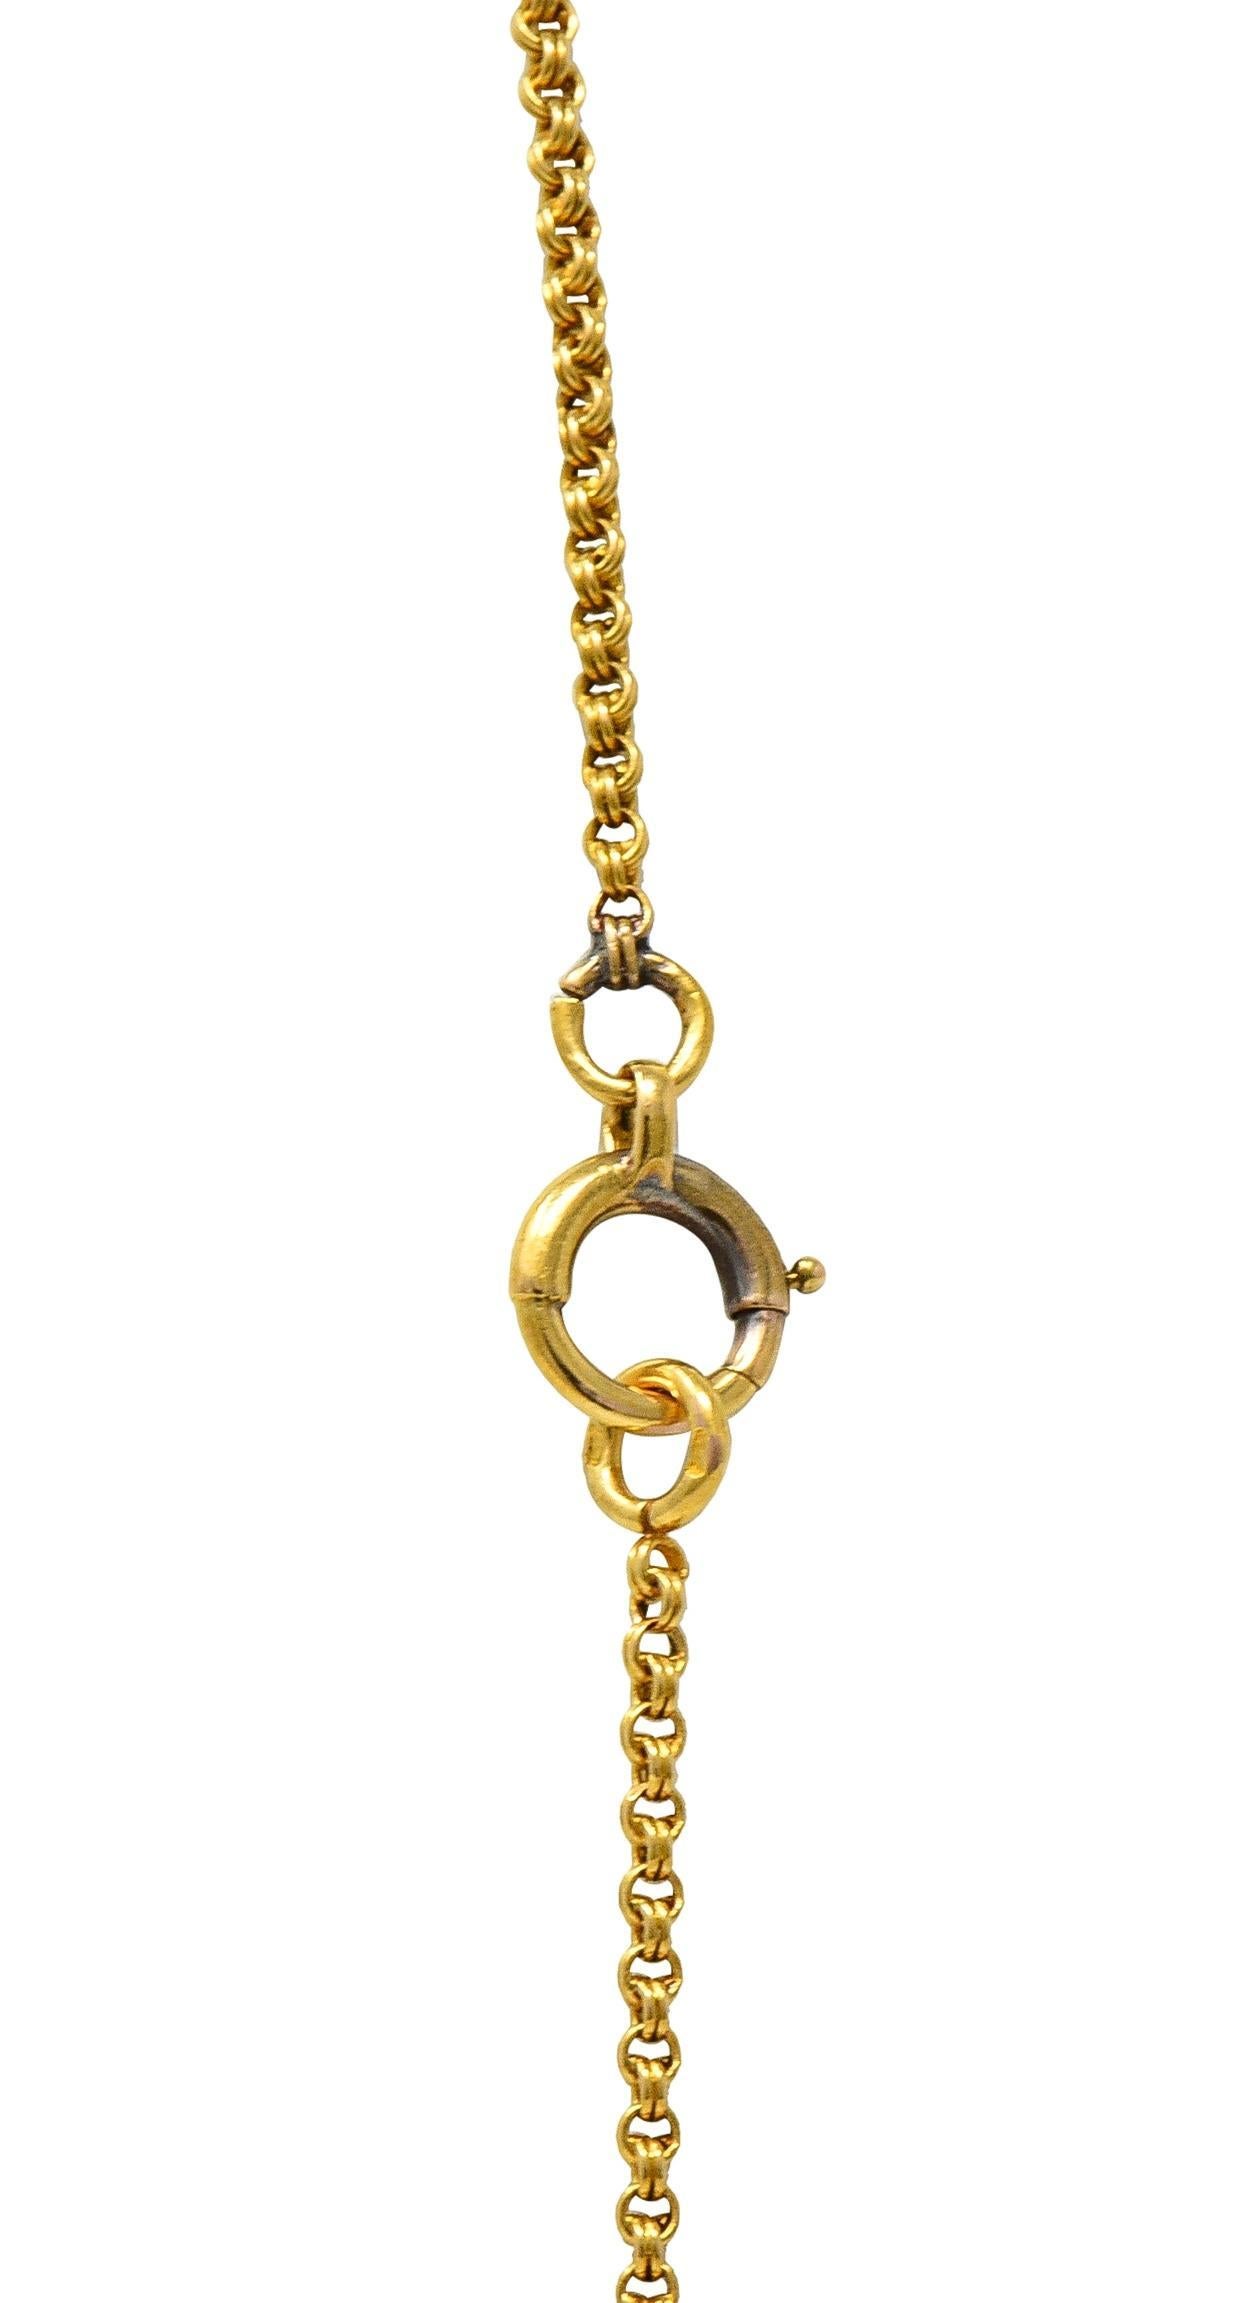 Victorian French Pearl 18 Karat Yellow Gold Antique Rolo Link Chain Necklace For Sale 4